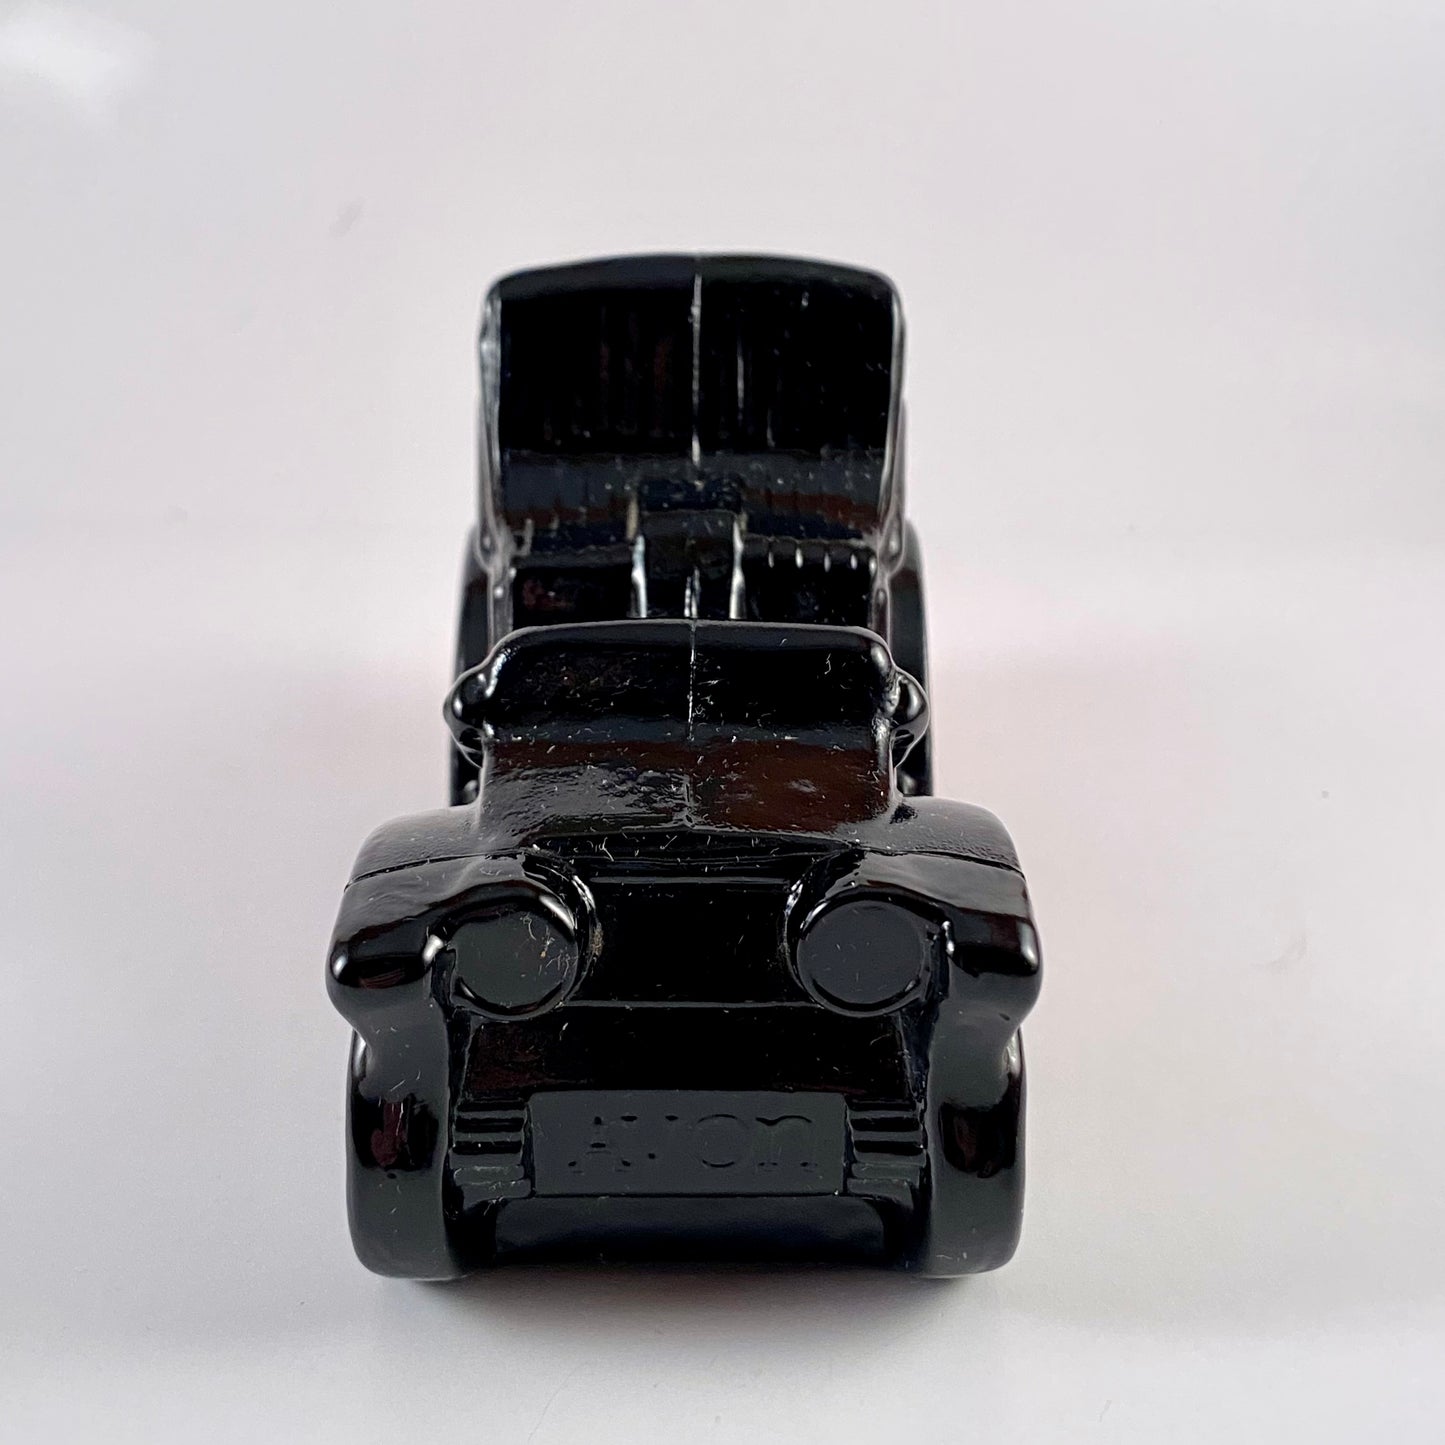 1970-1972 Avon Electric Charger Car Bottle-Filled